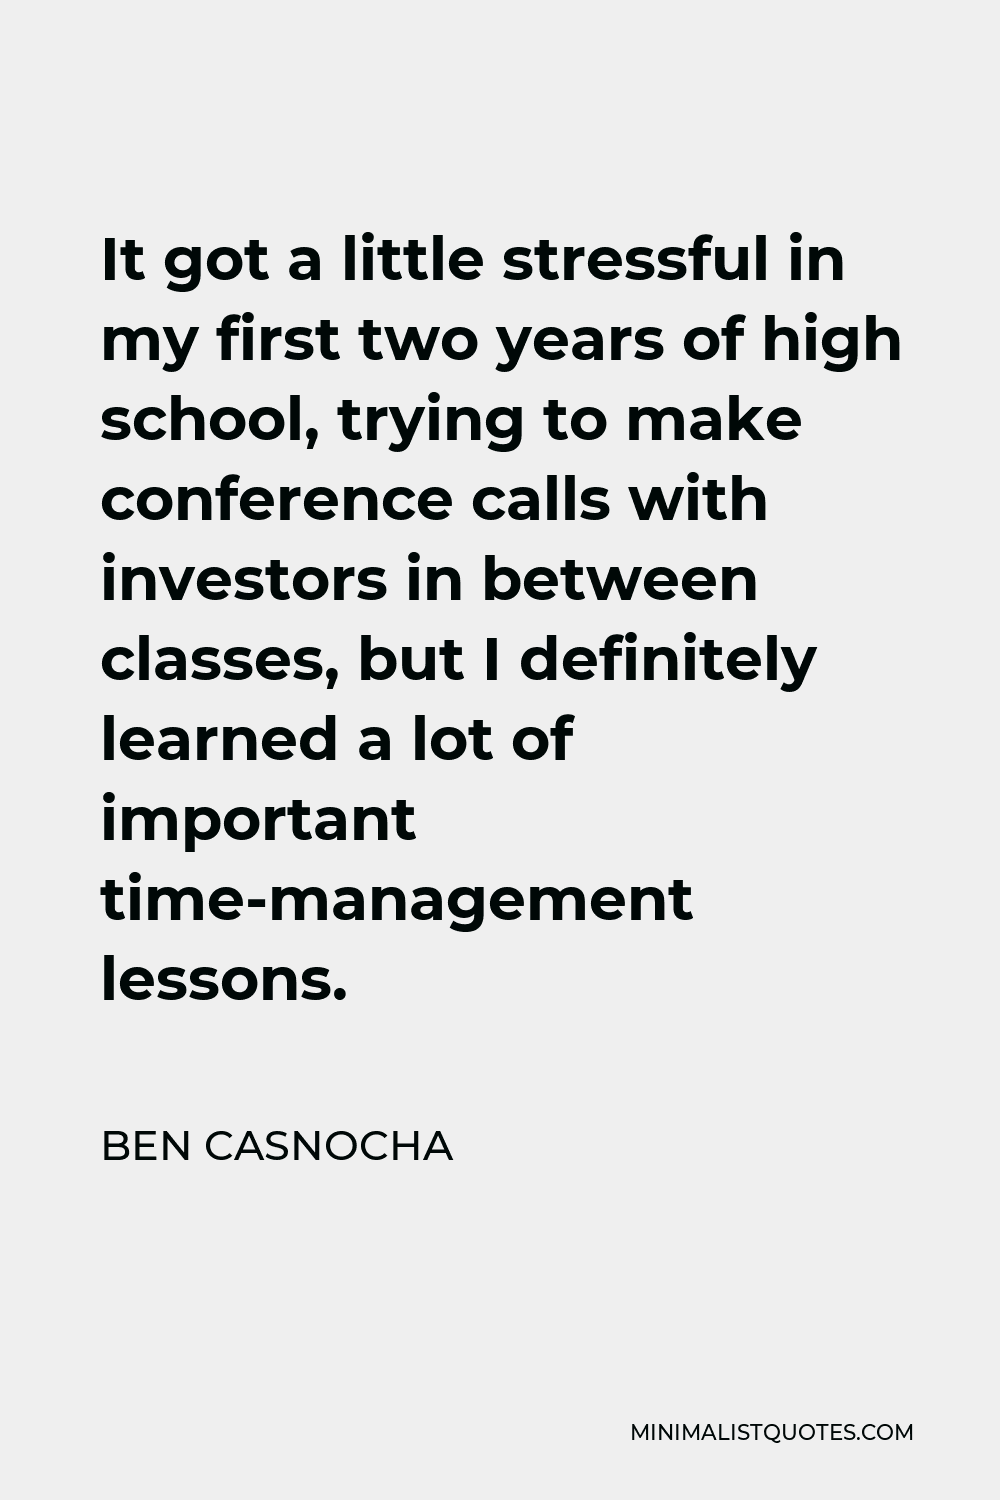 Ben Casnocha Quote - It got a little stressful in my first two years of high school, trying to make conference calls with investors in between classes, but I definitely learned a lot of important time-management lessons.